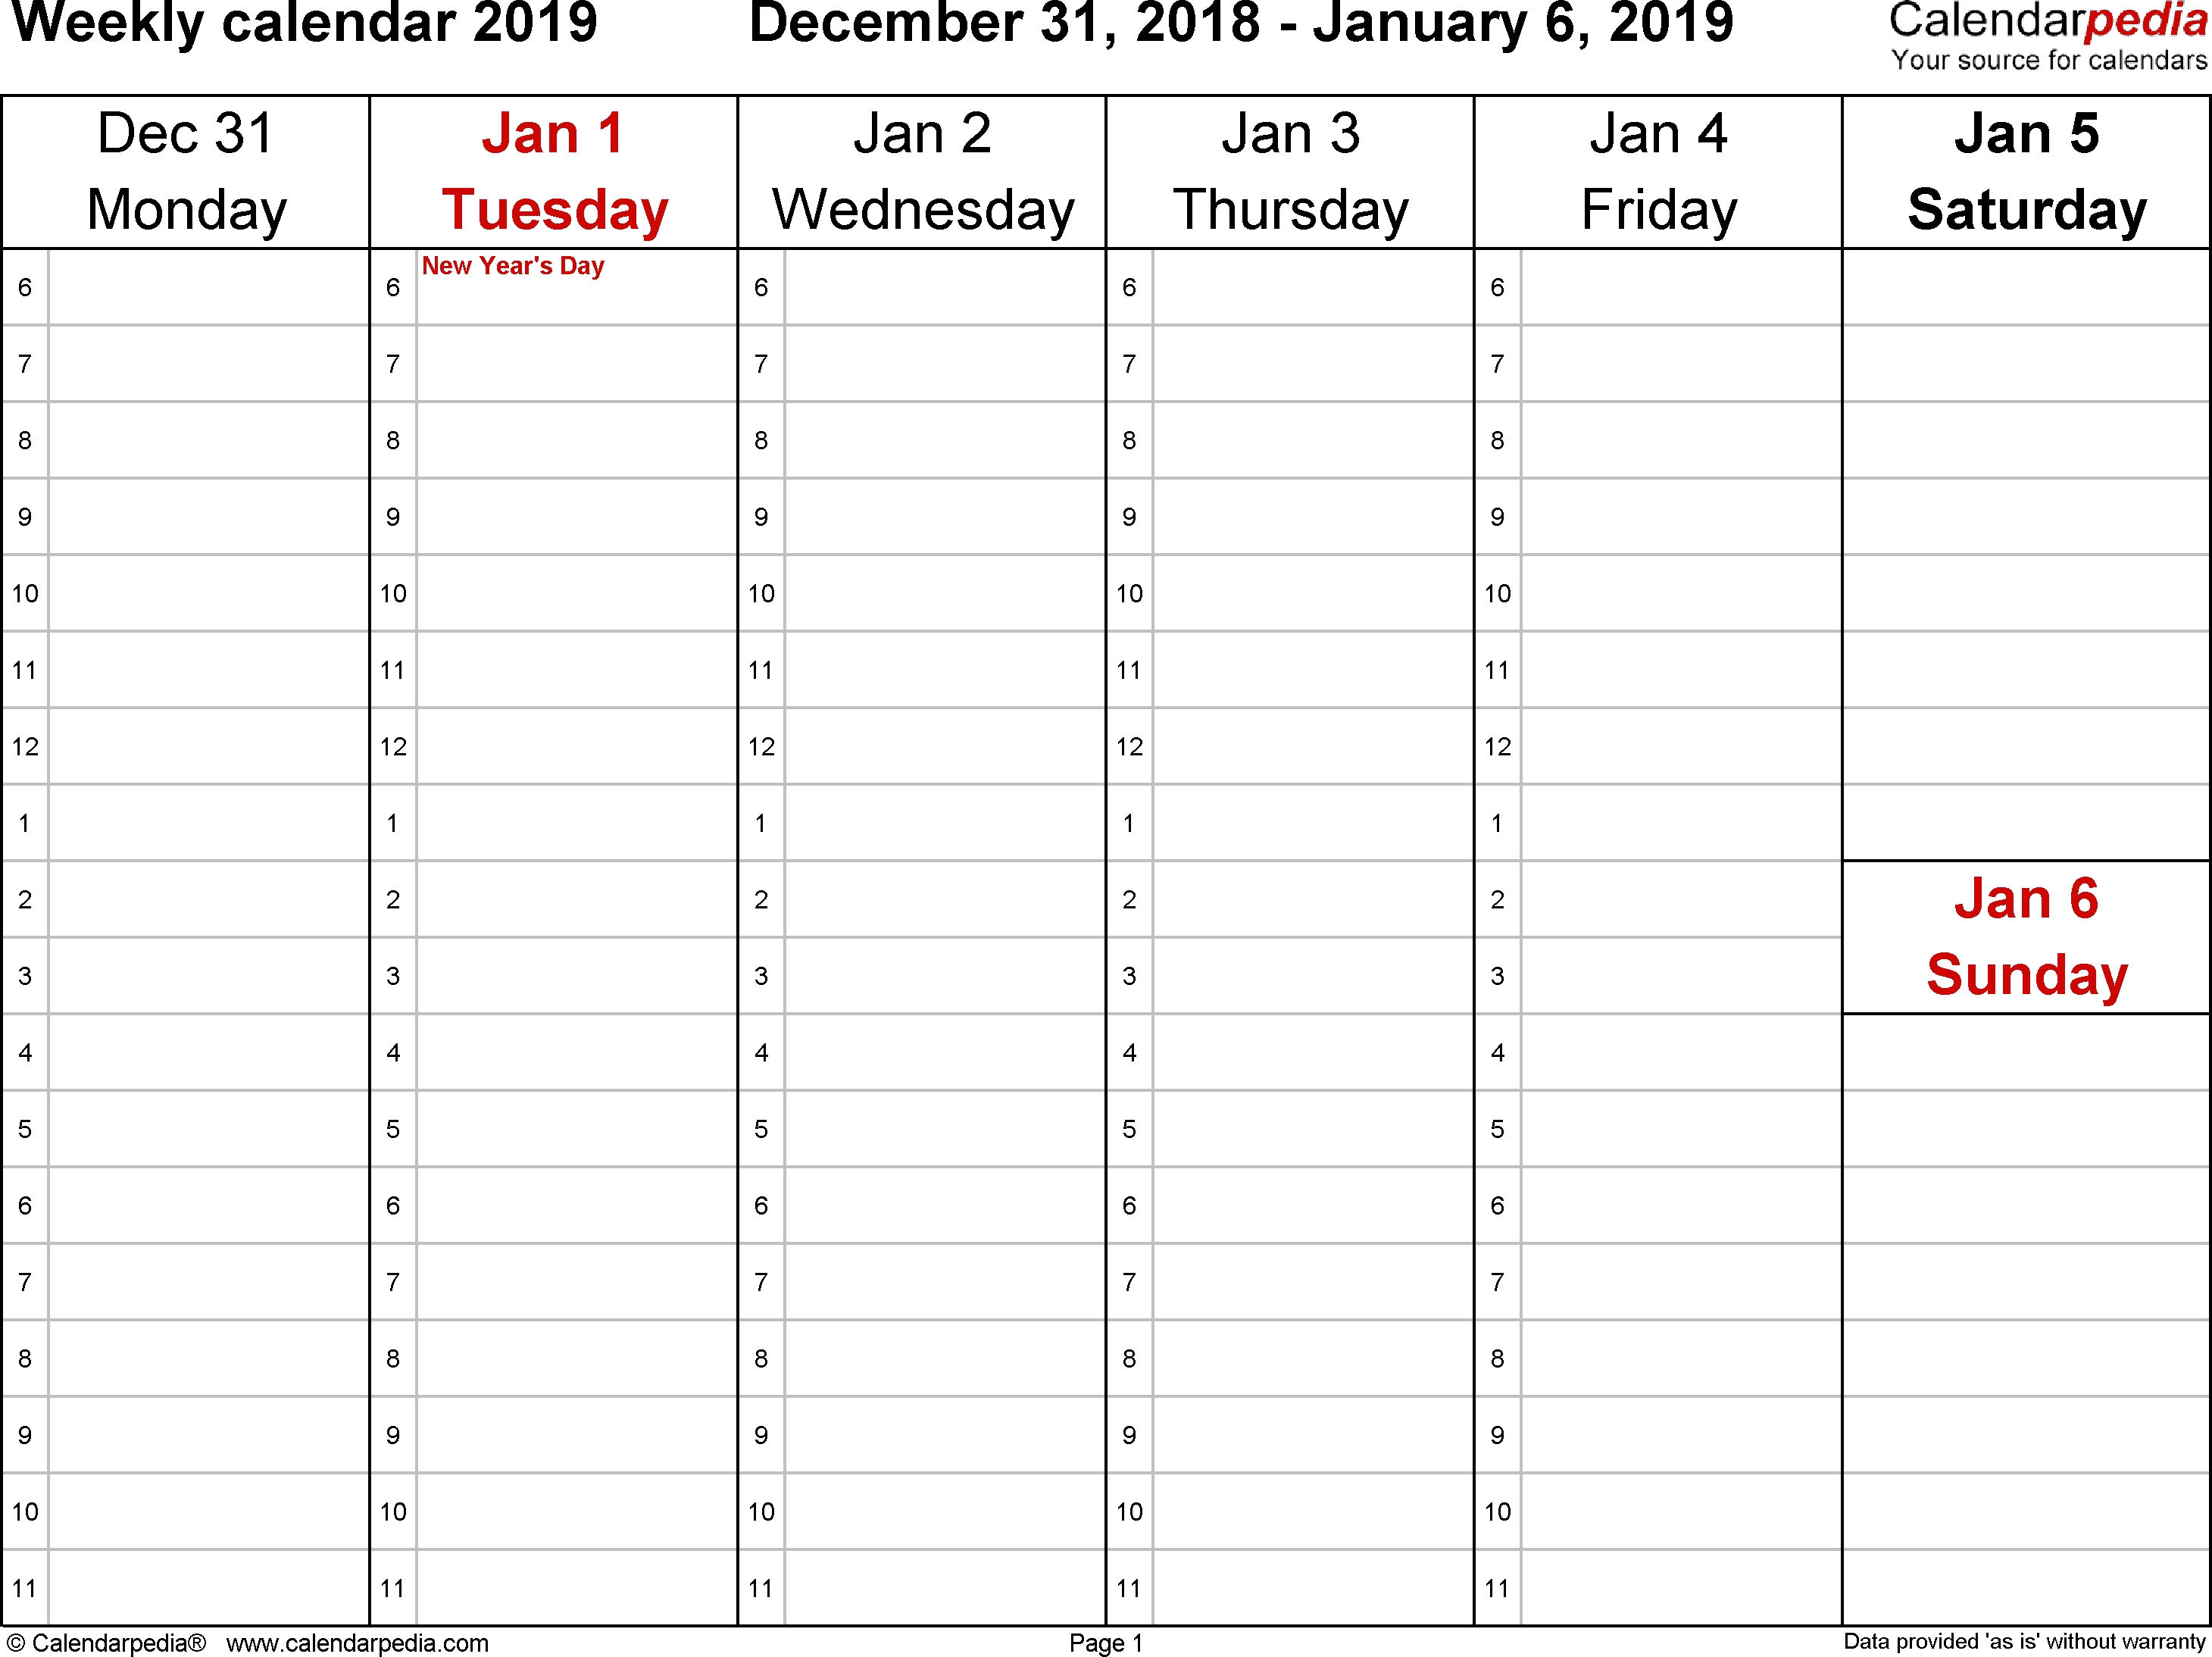 Weekly Calendars 2019 For Excel - 12 Free Printable Templates Excel Calendar Template That Starts Week On Monday